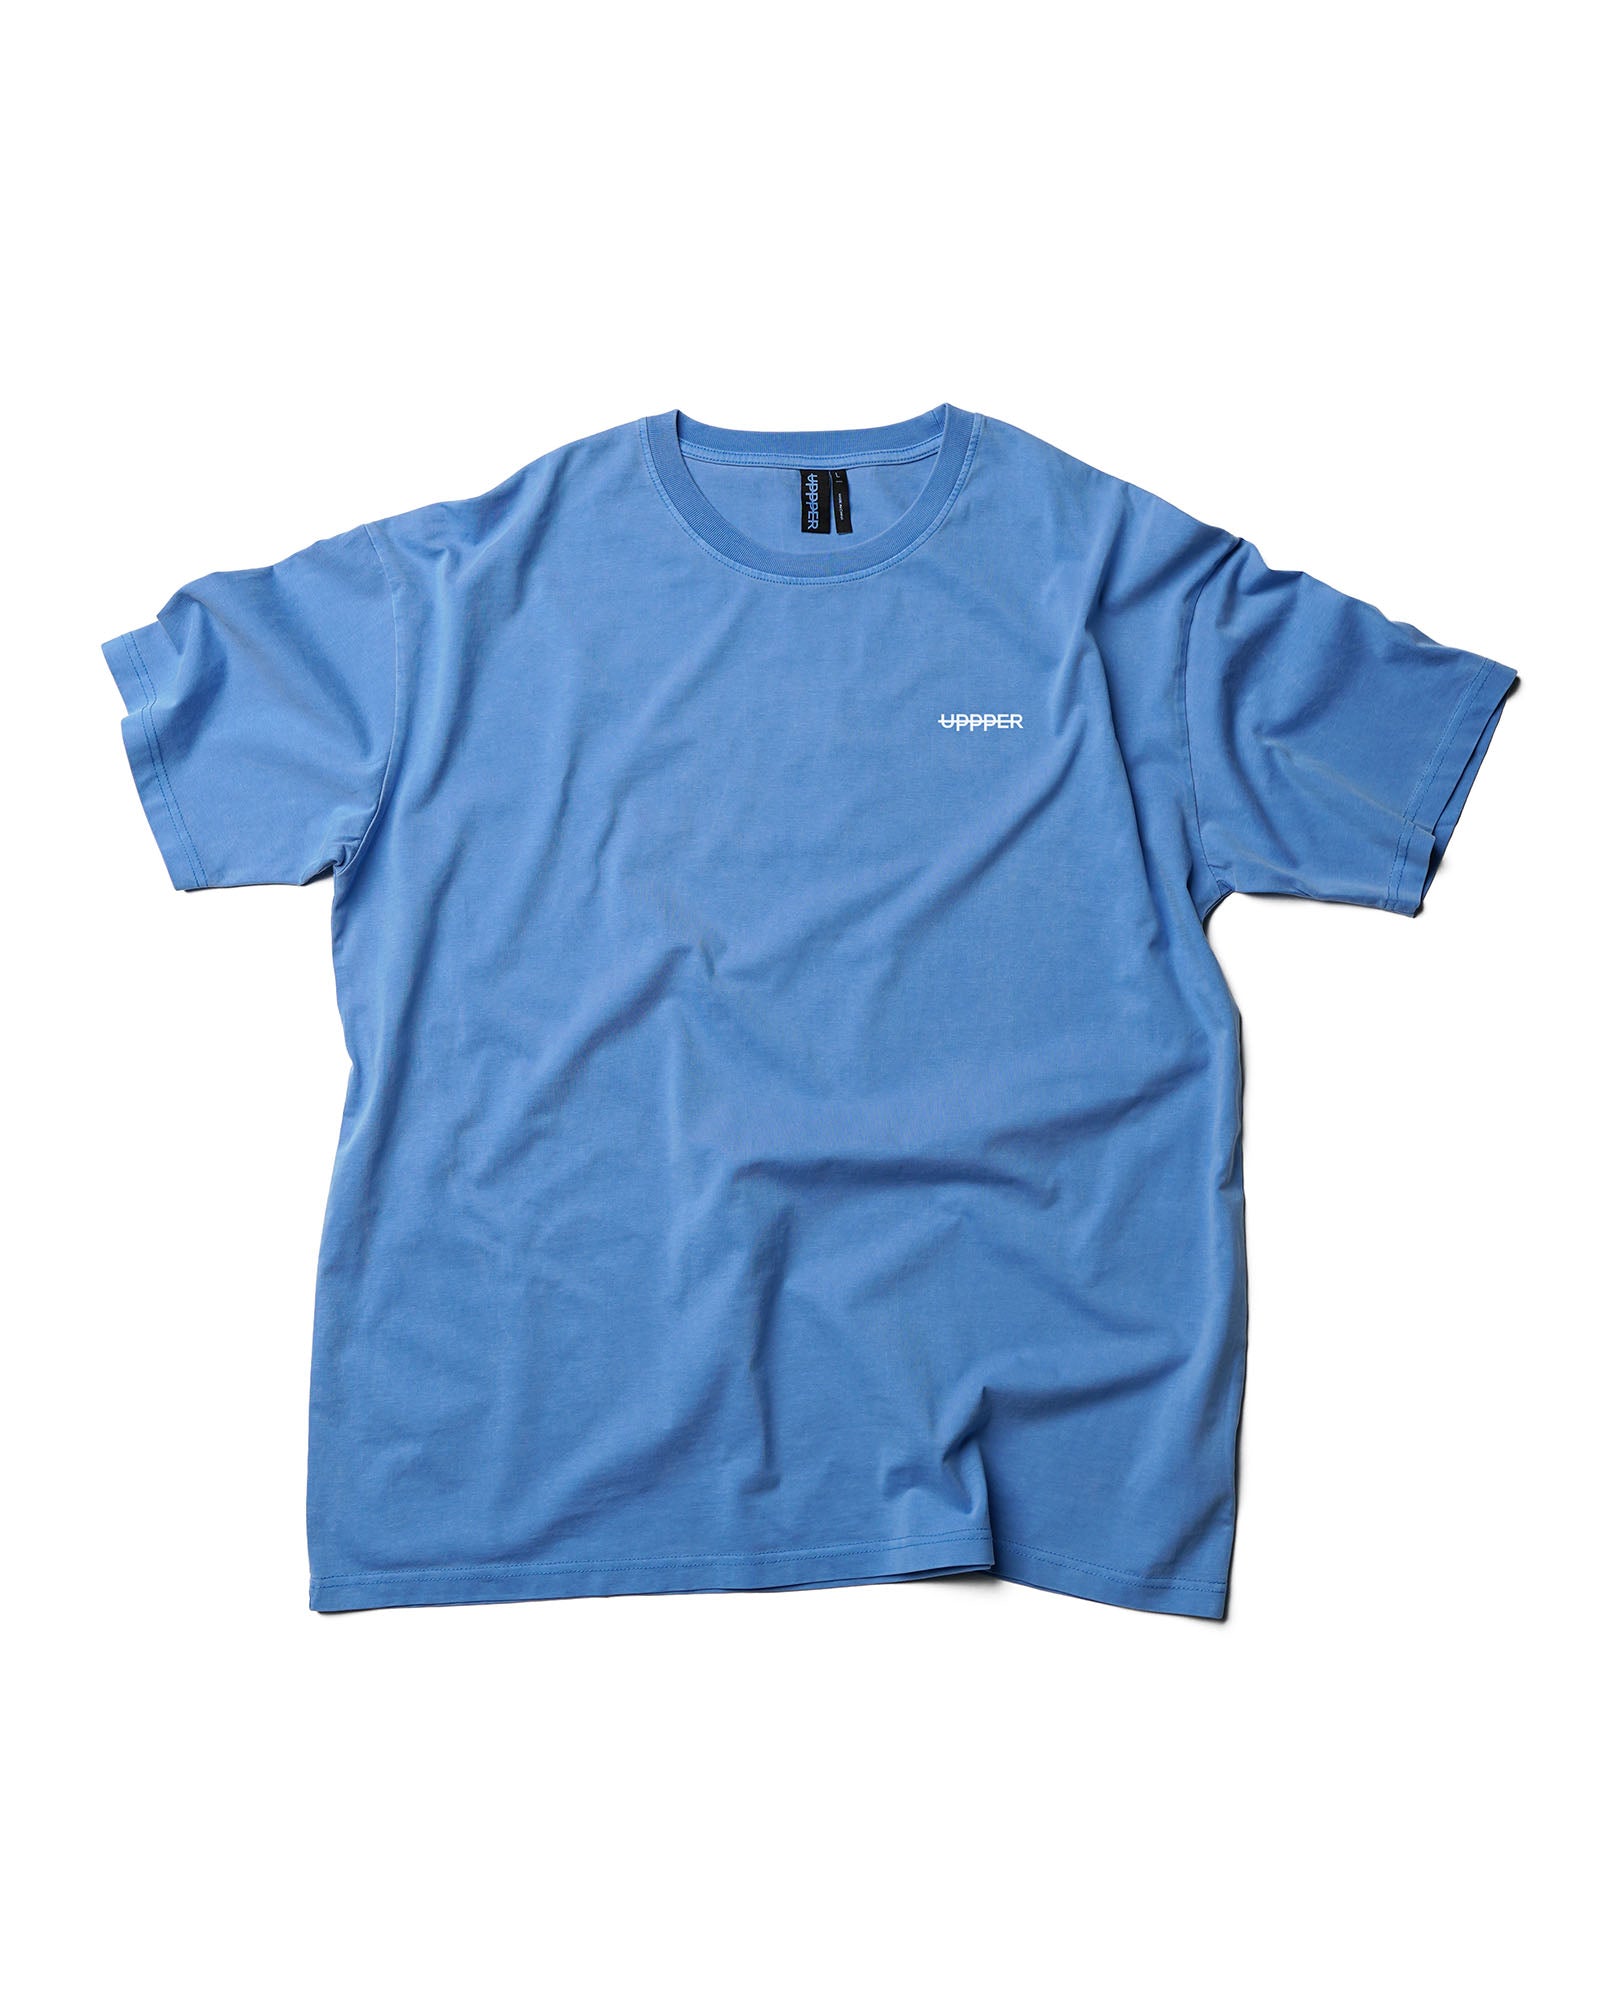 uppper t-shirt FTN washed blue